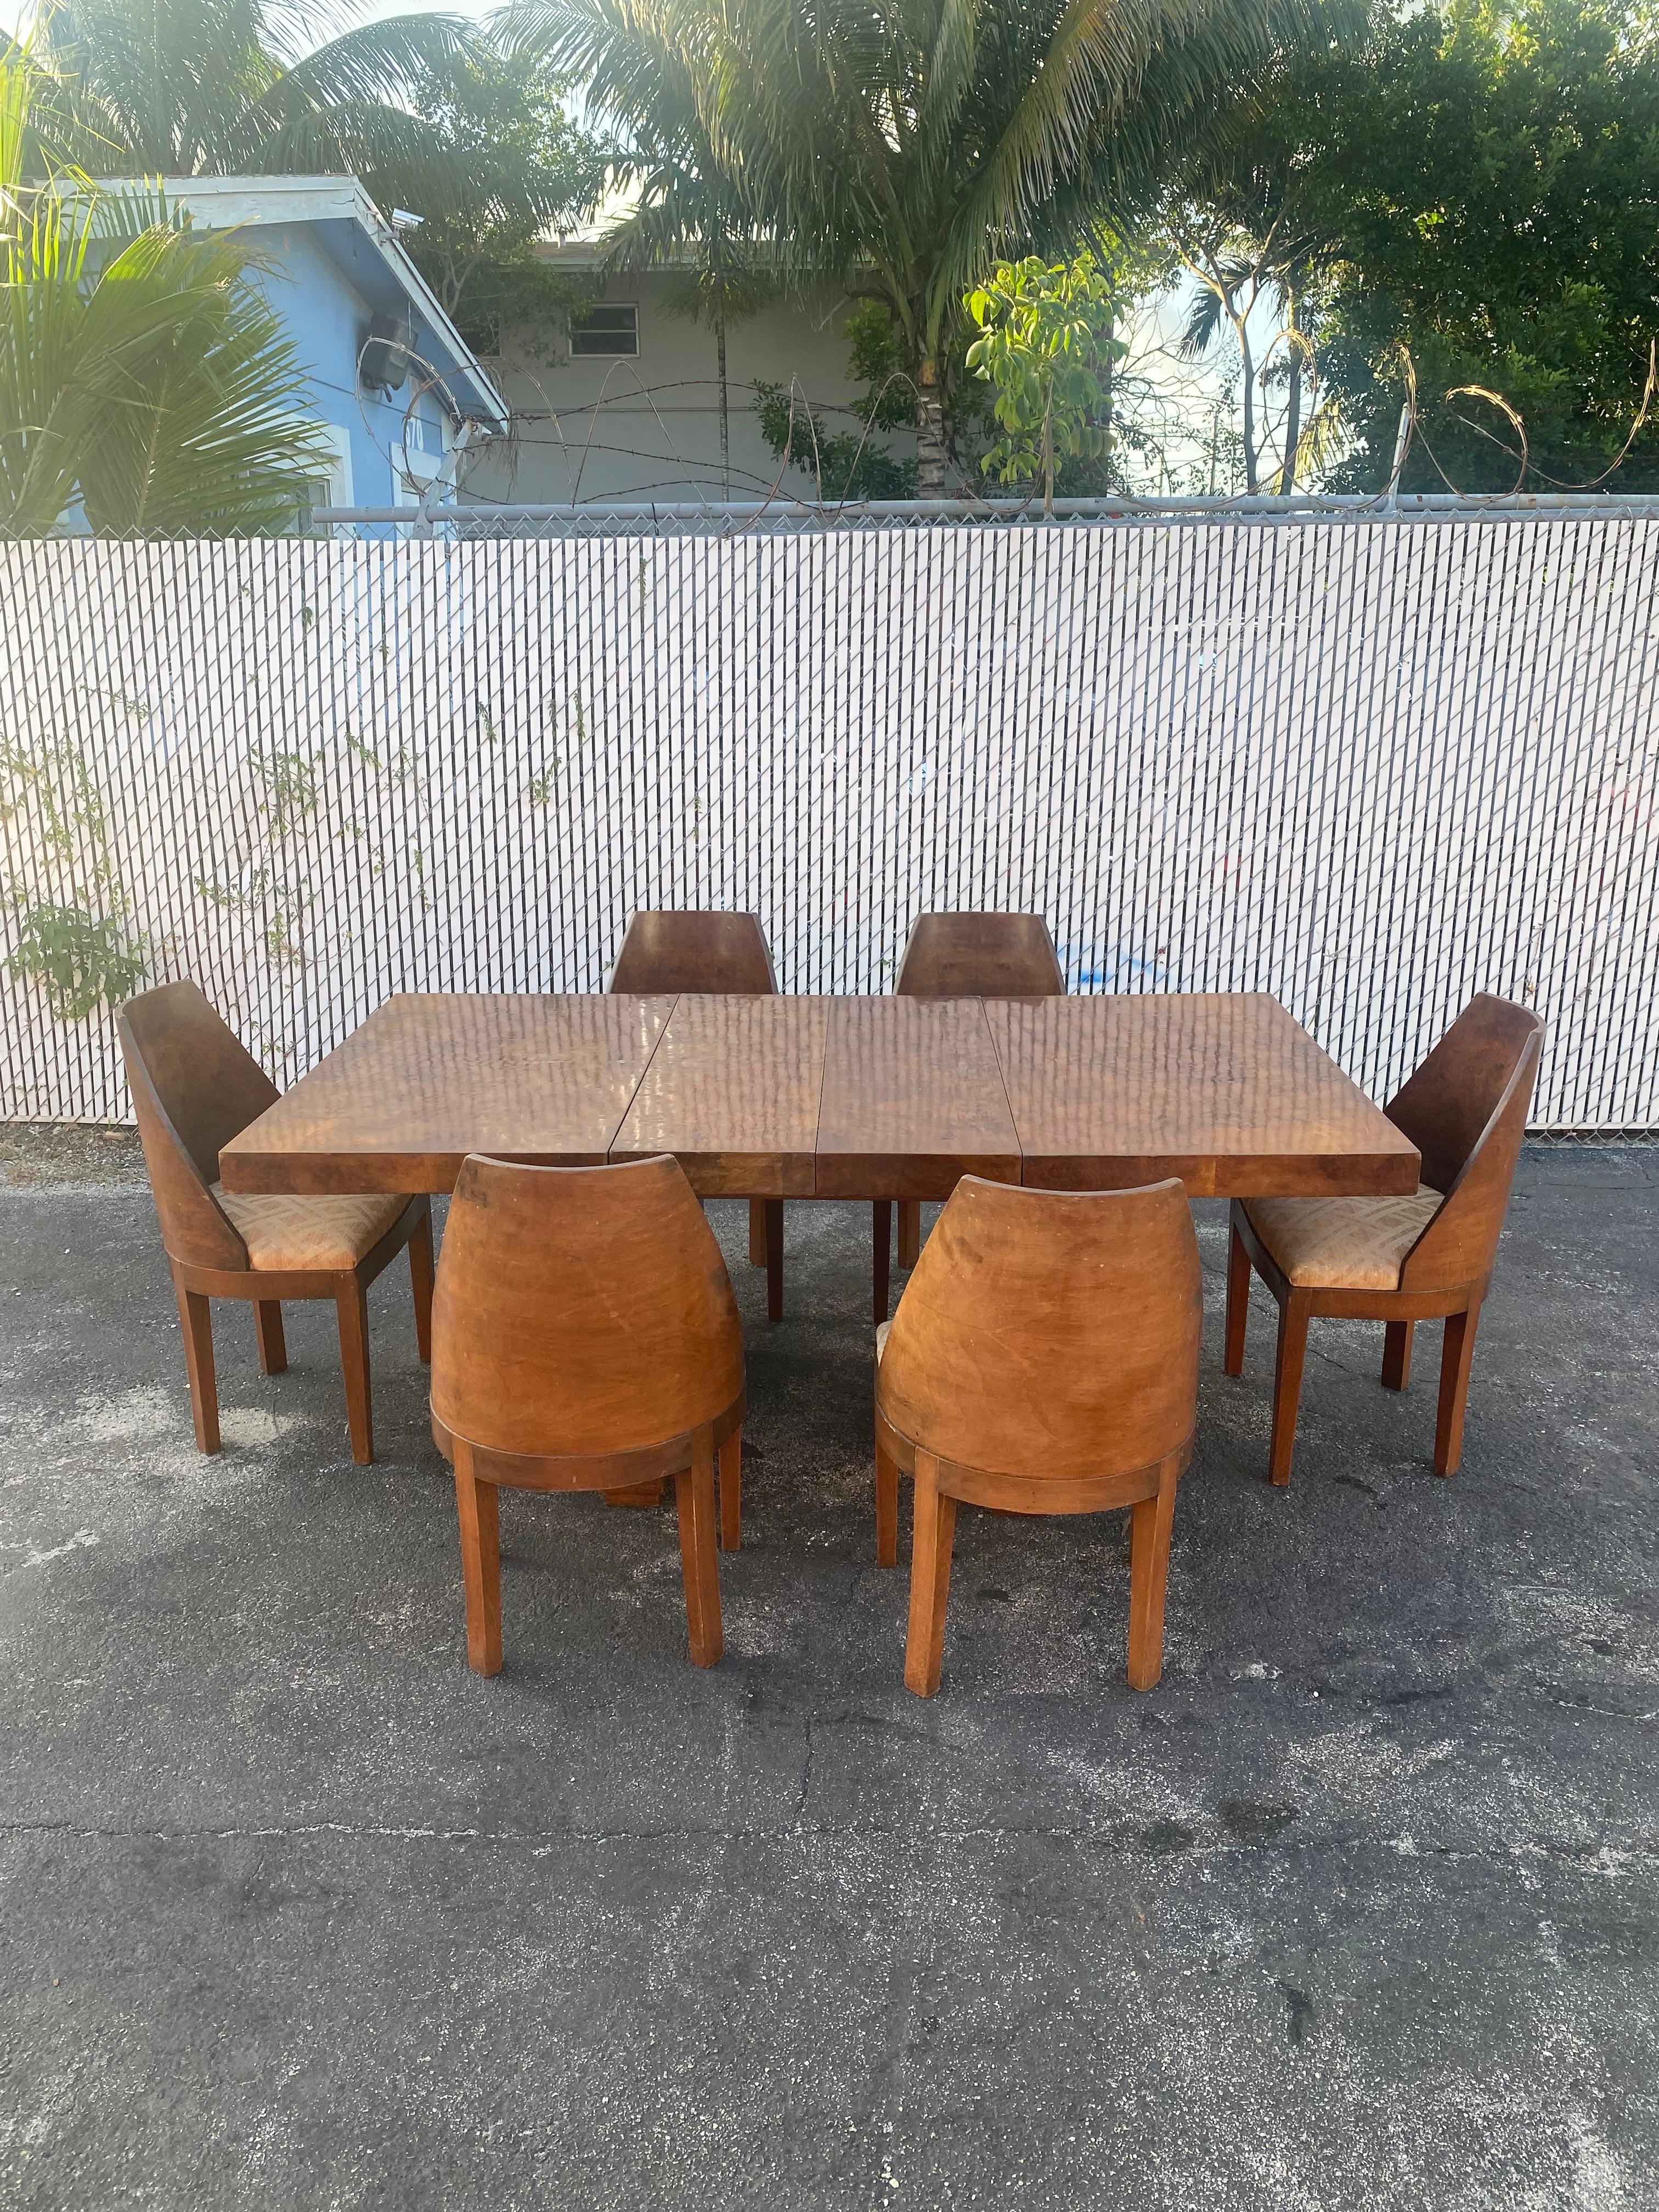 On offer on this occasion is one of the most stunning, rare, complete Art Deco dining set you could hope to find. Outstanding design is exhibited throughout. The beautiful walnut dining table and chairs In the style of Gilbert Rohde are statement